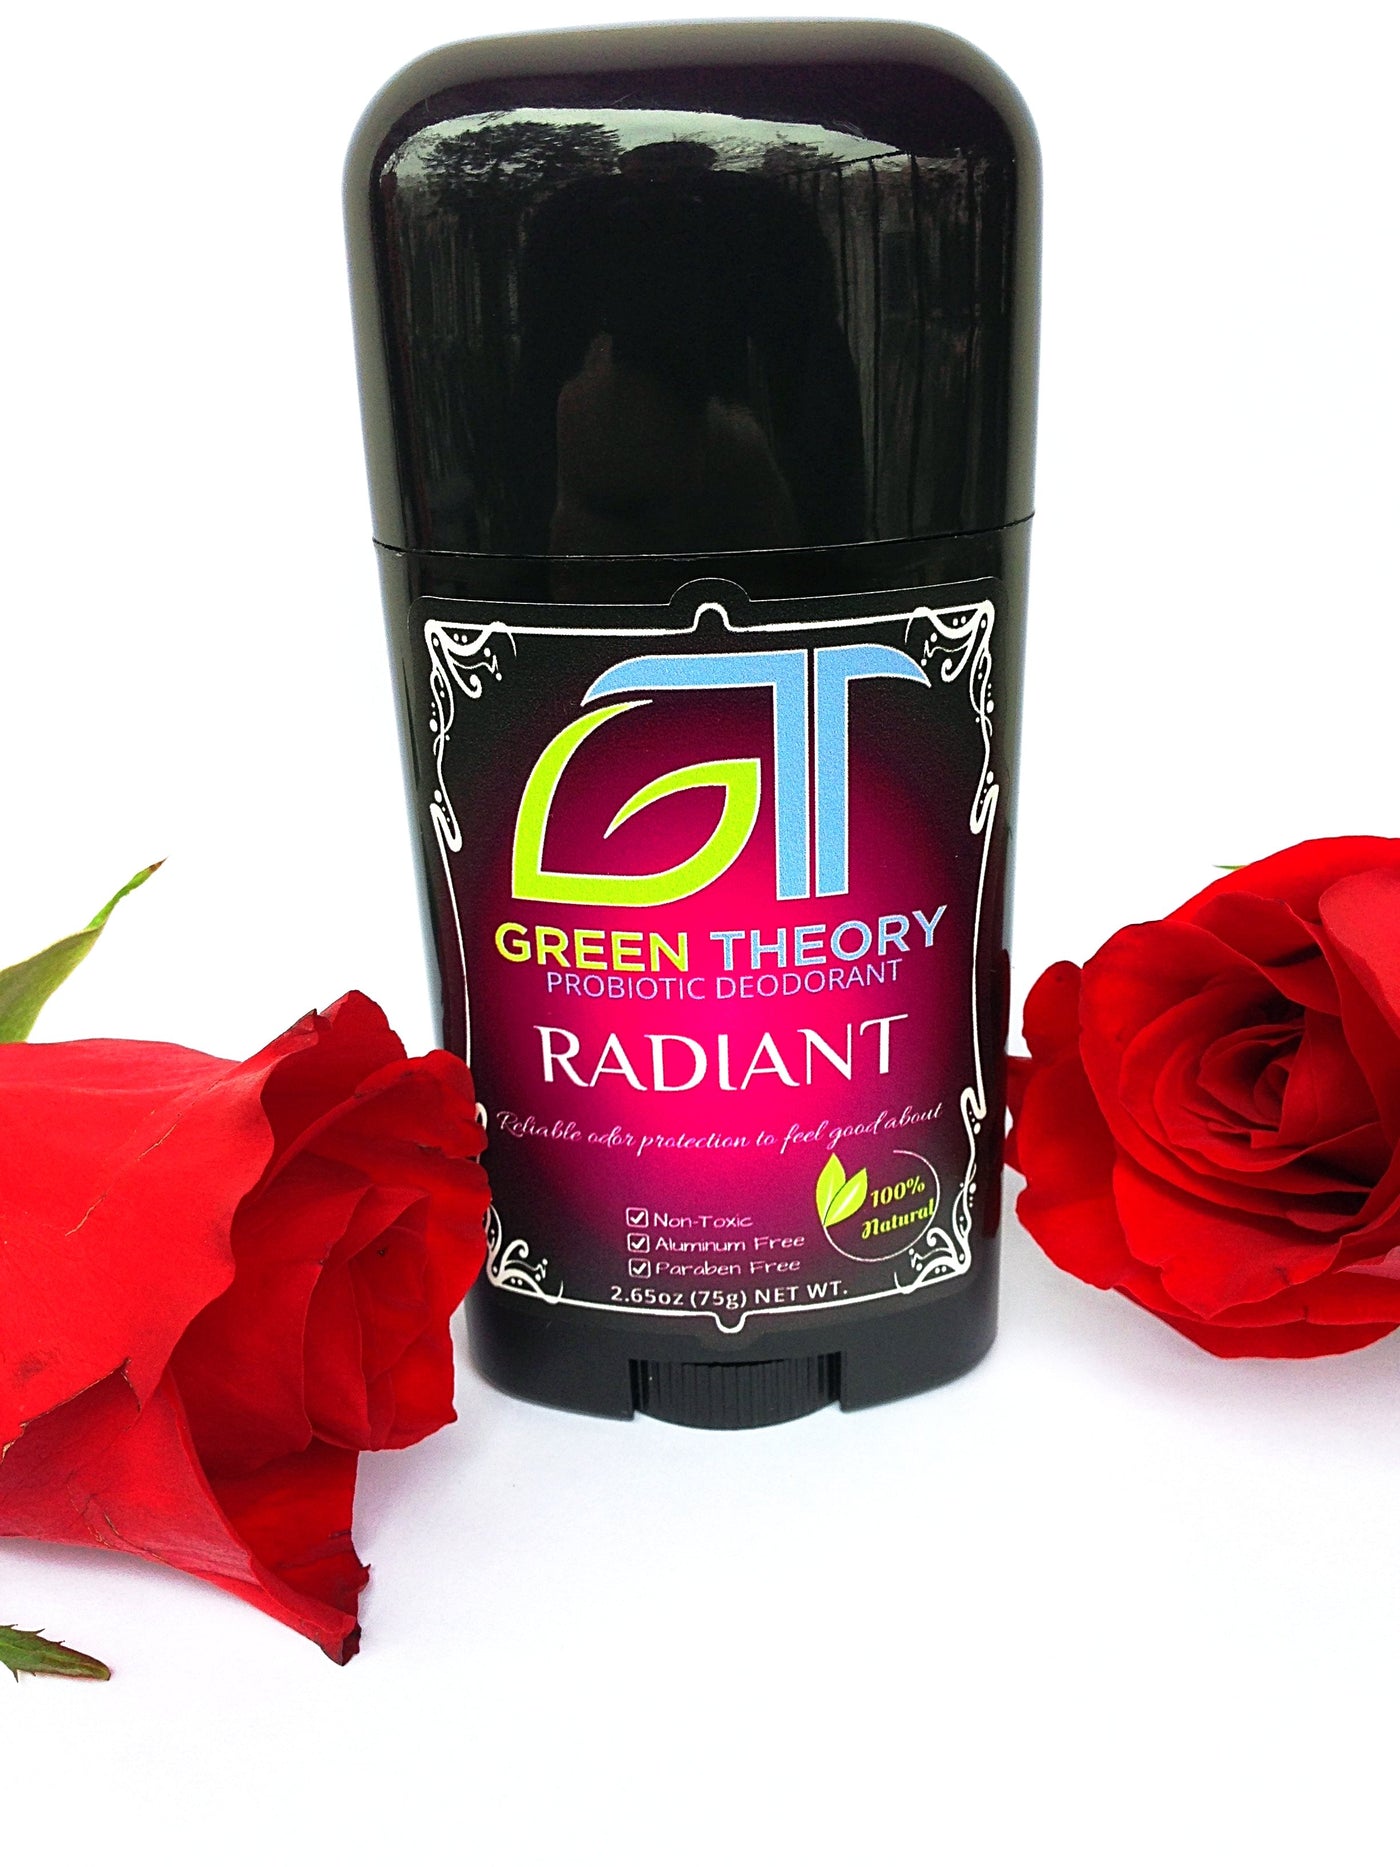 photo of greent theory radiant probiotic aluminum free natural deodorant against a pure white background with roses laid at the sides of the stick